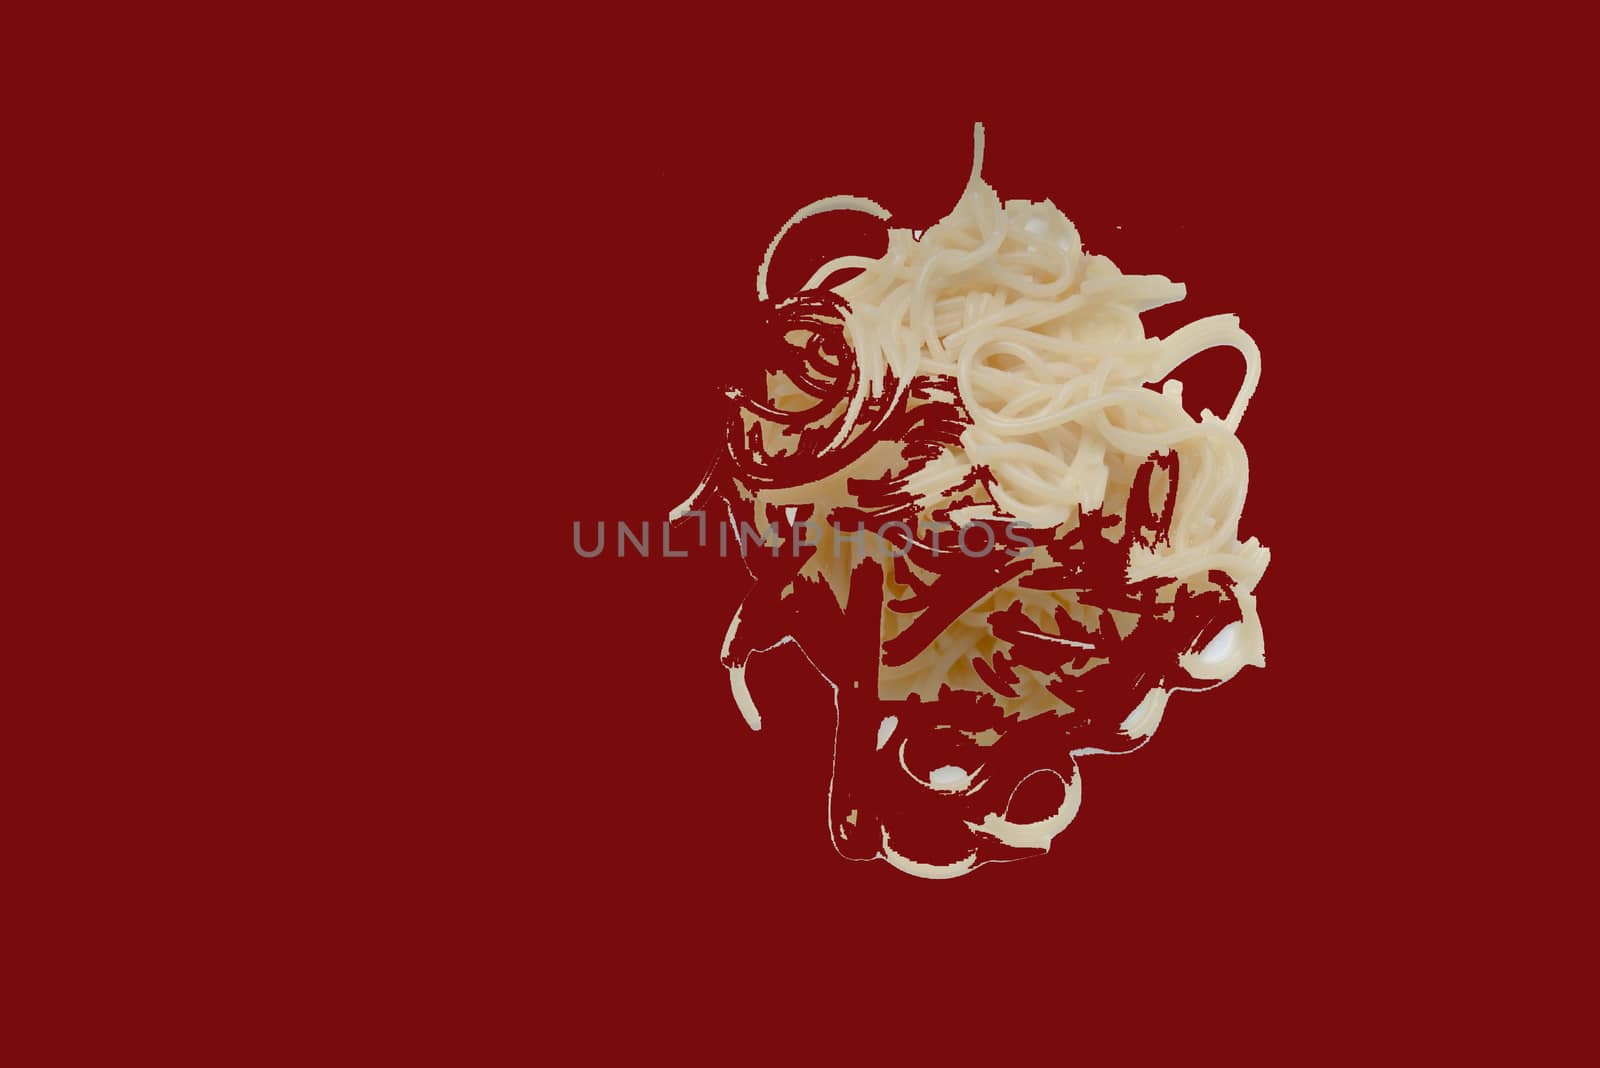 Abstract pasta on a red background by SemFid